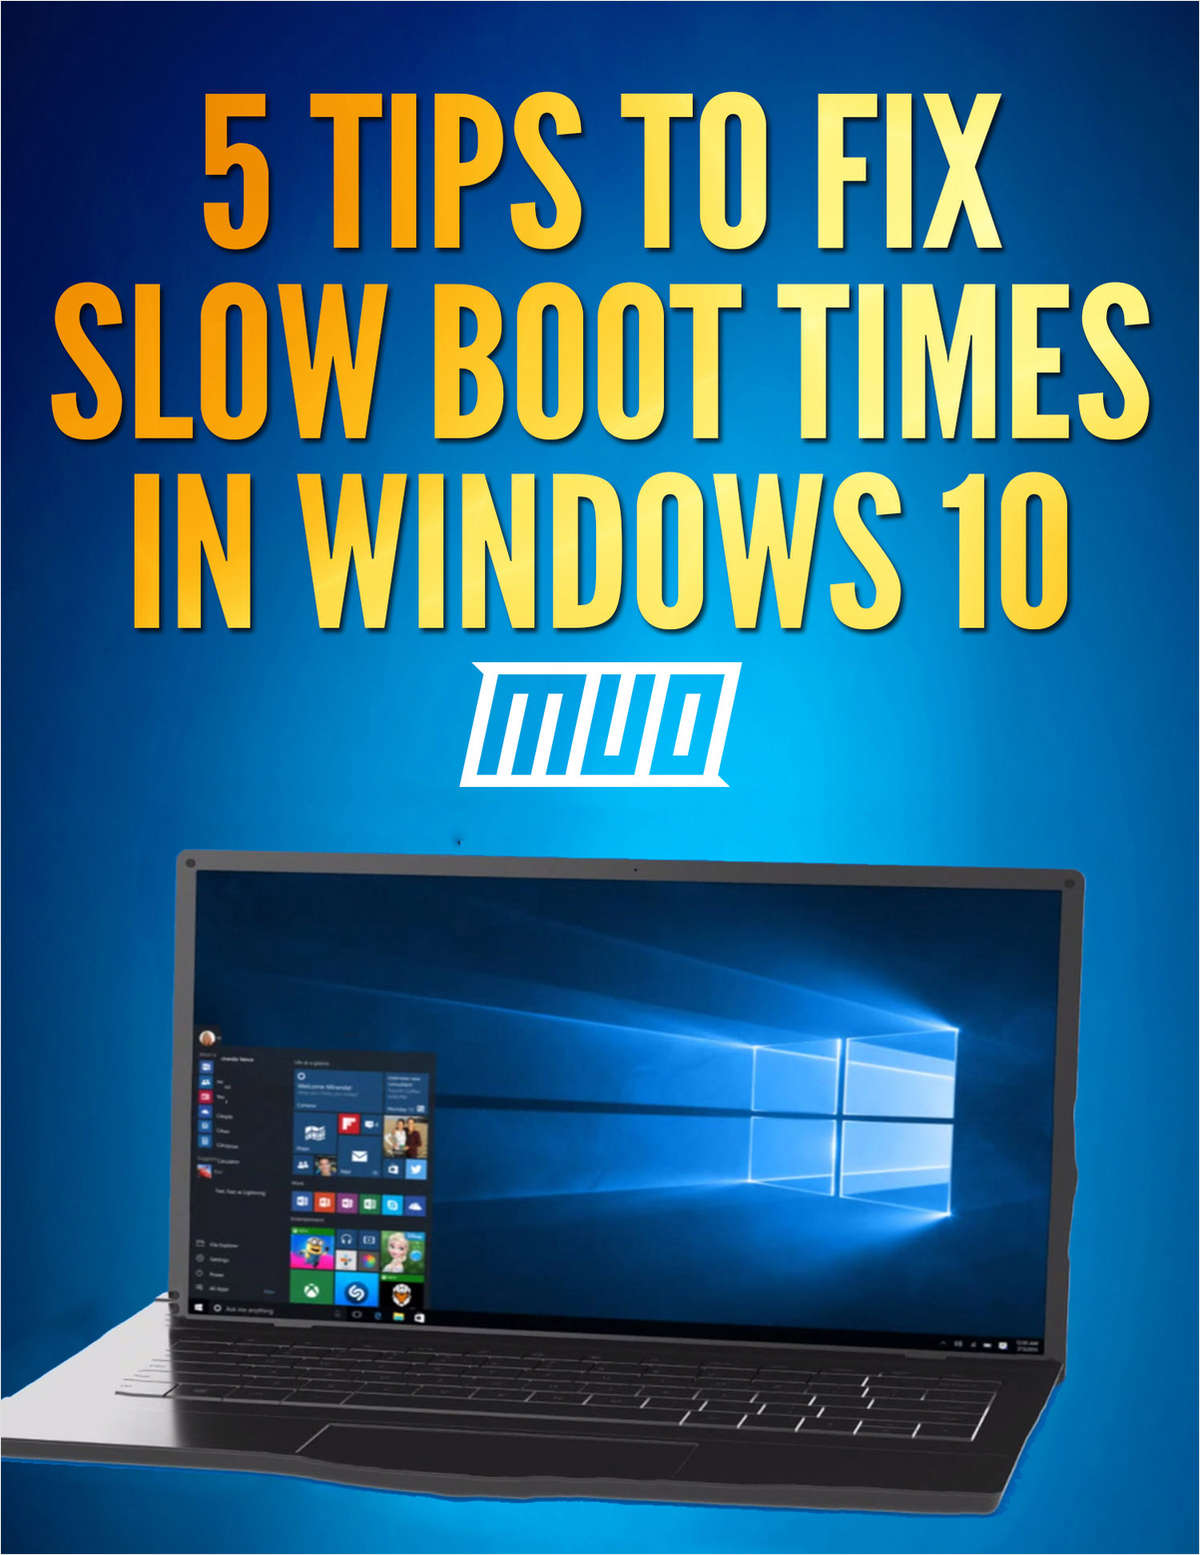 5-tips-to-fix-slow-boot-times-in-windows-10